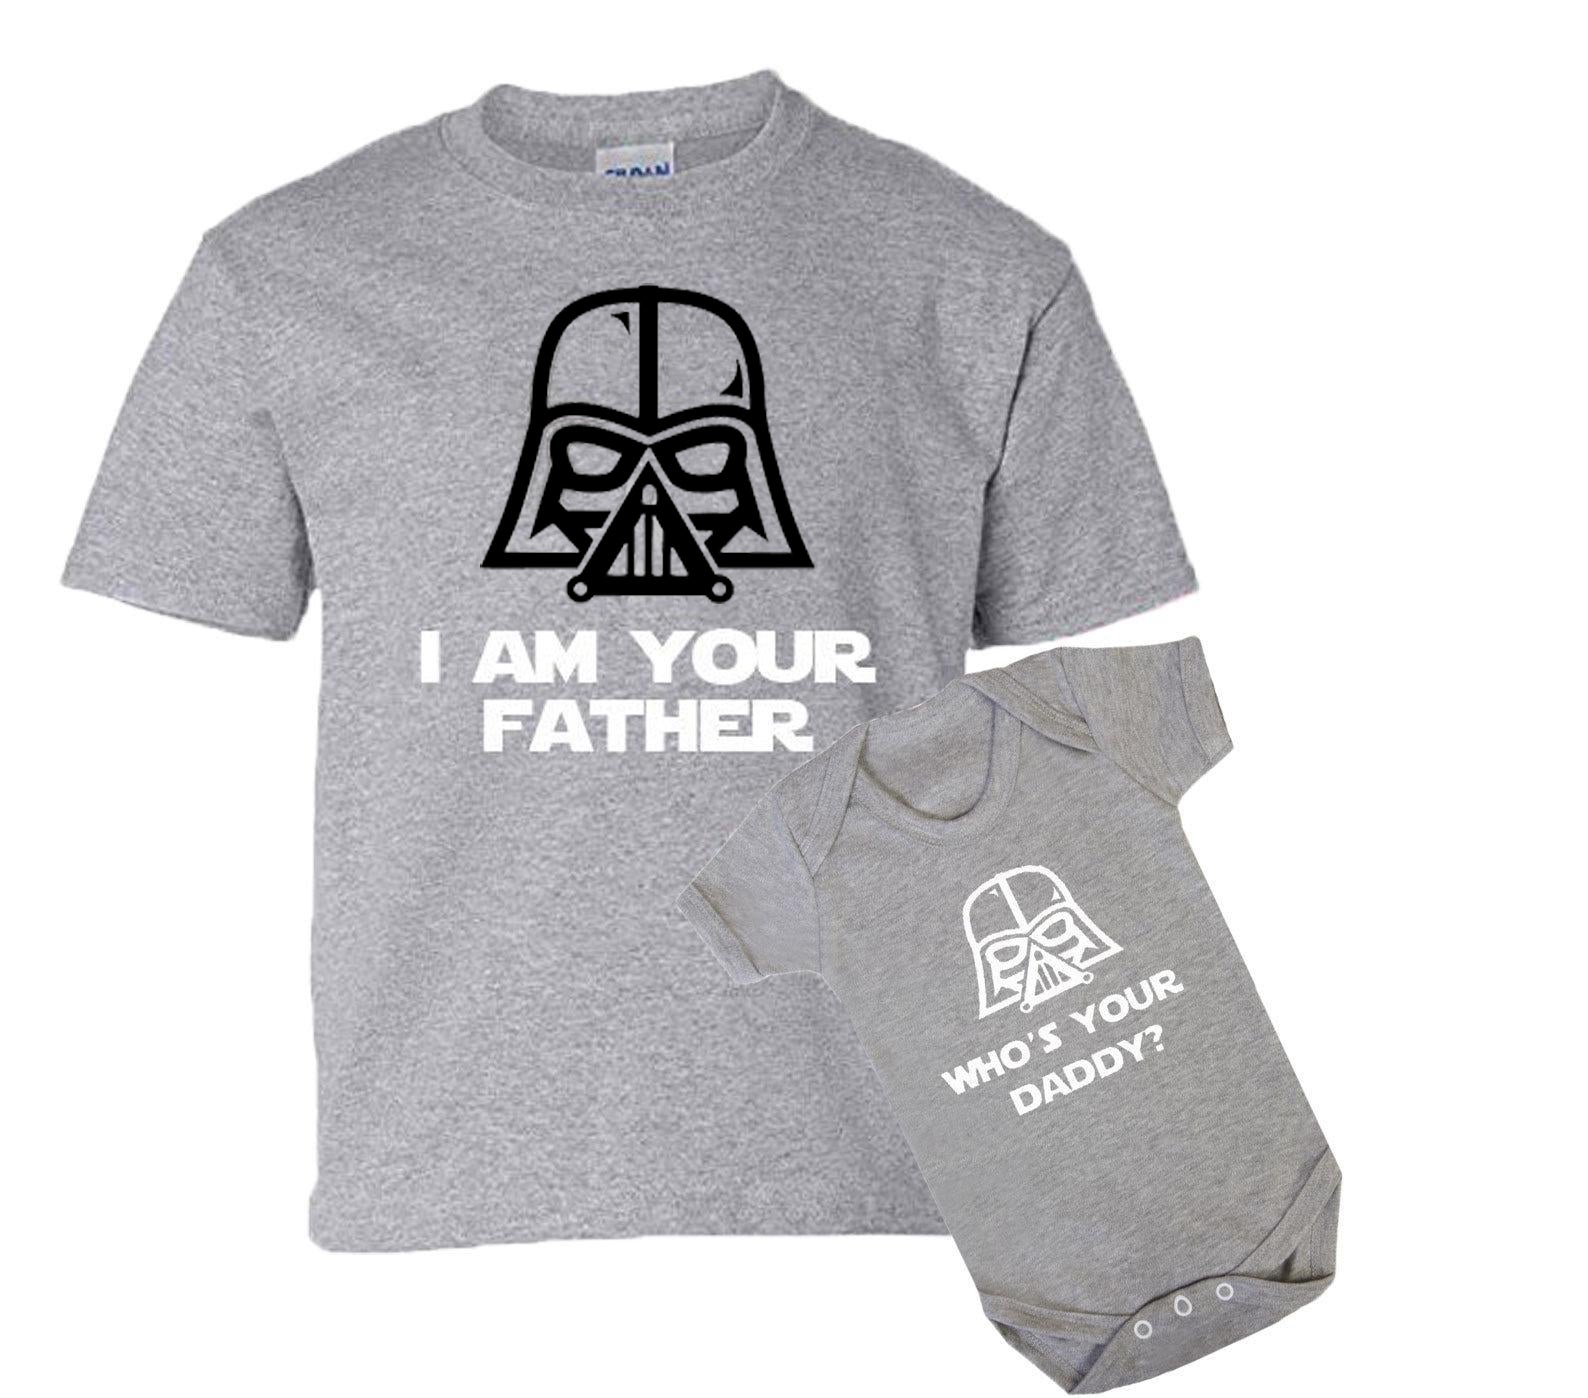 Who's Your Daddy Vader T-Shirt